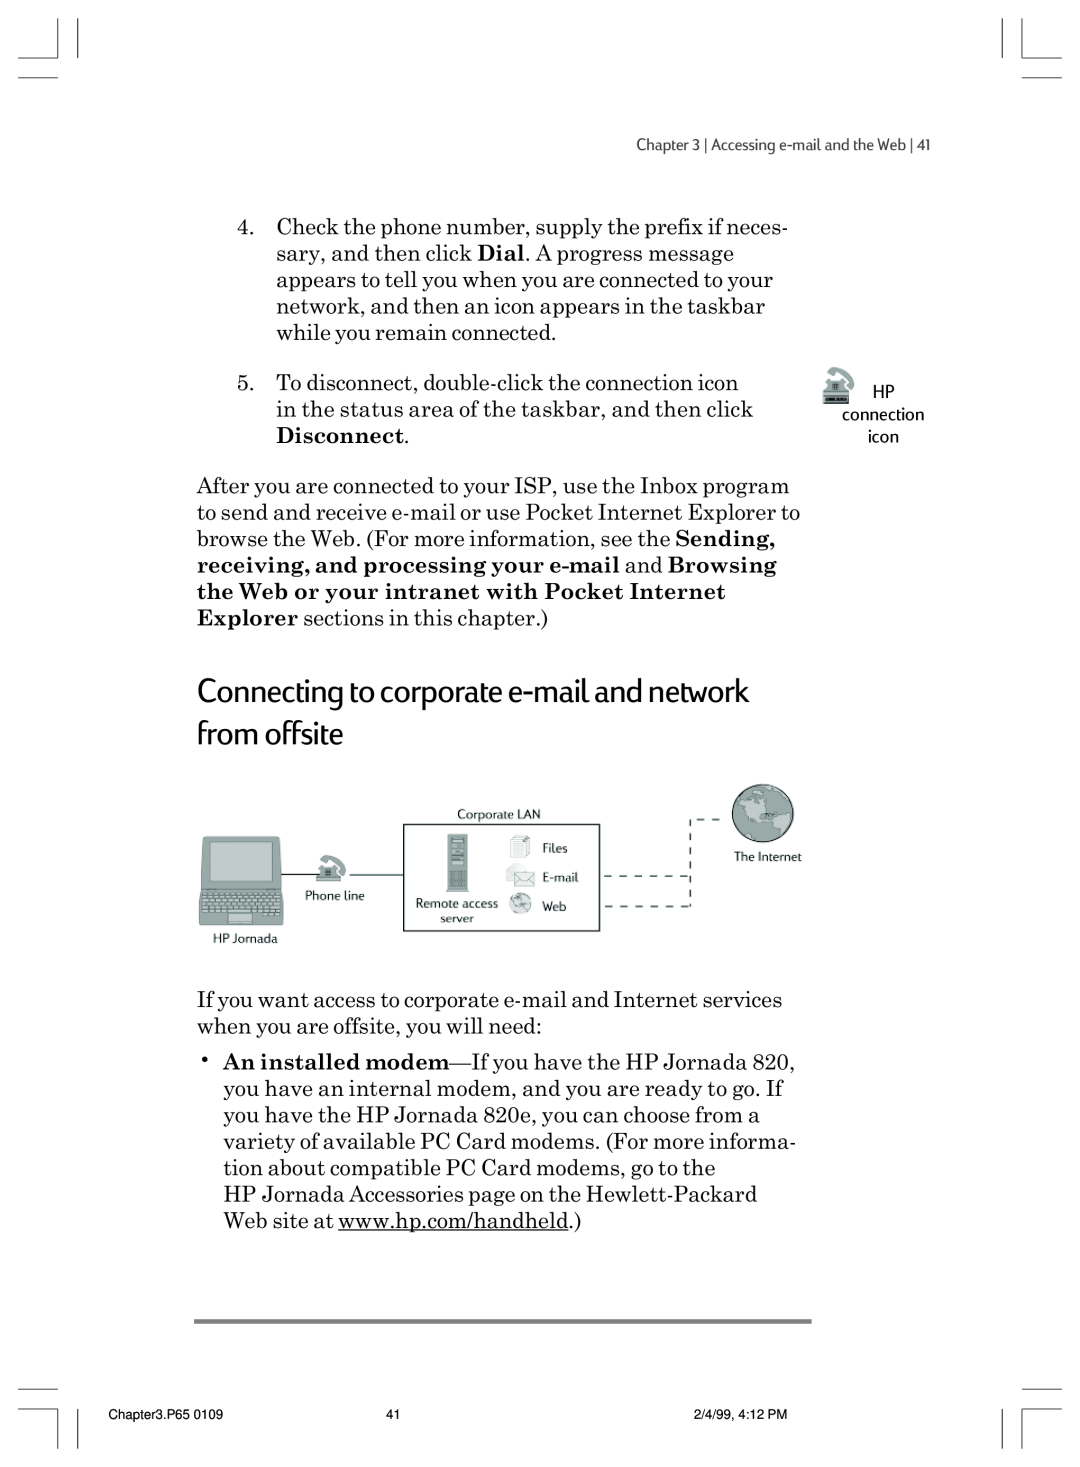 HP 820 Connecting to corporate e-mail and network from offsite, Disconnect, the Web or your intranet with Pocket Internet 